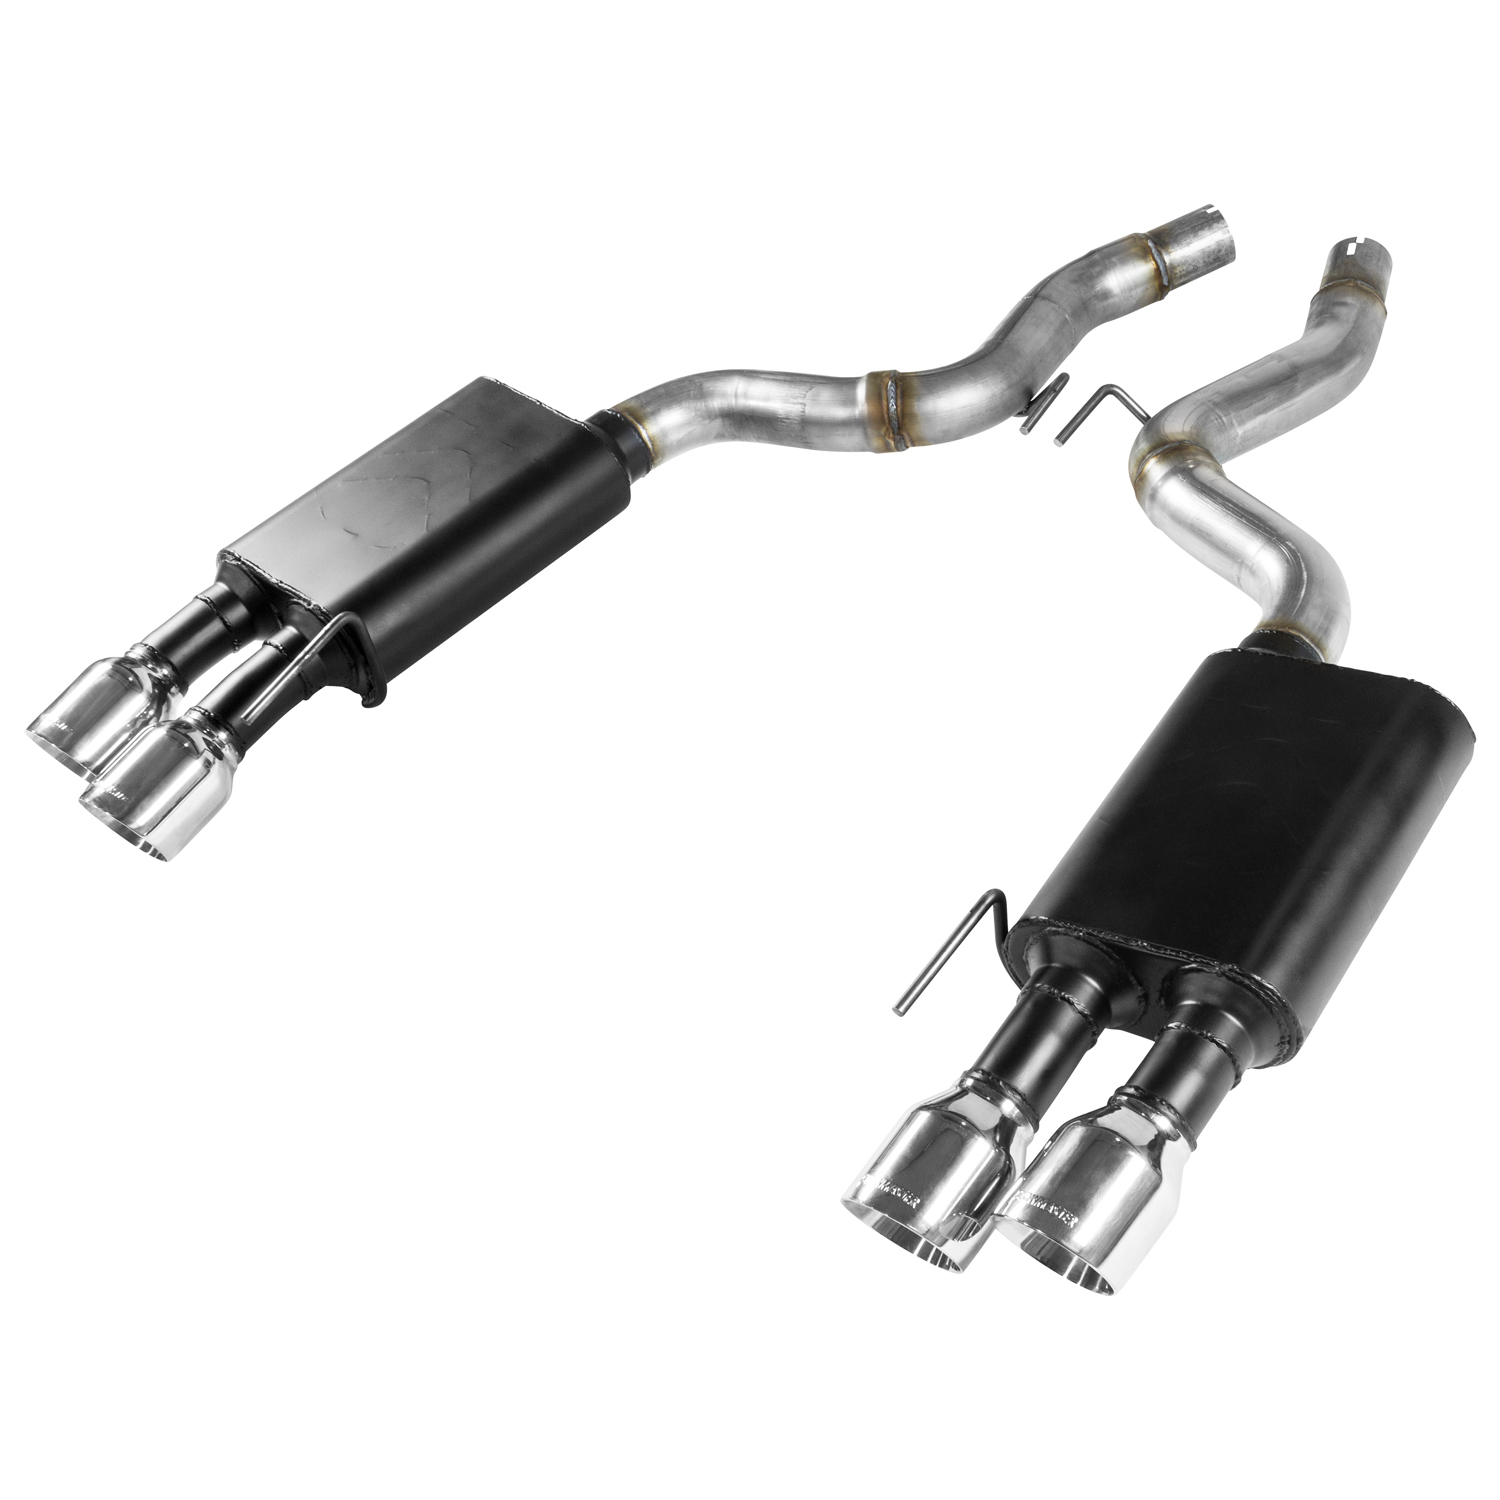 Flowmaster Exhaust System, American Thunder, Axle-Back, 3" Tailpipe, 4" Tips, Stainless, Black/Natural, Coyote, Ford Must